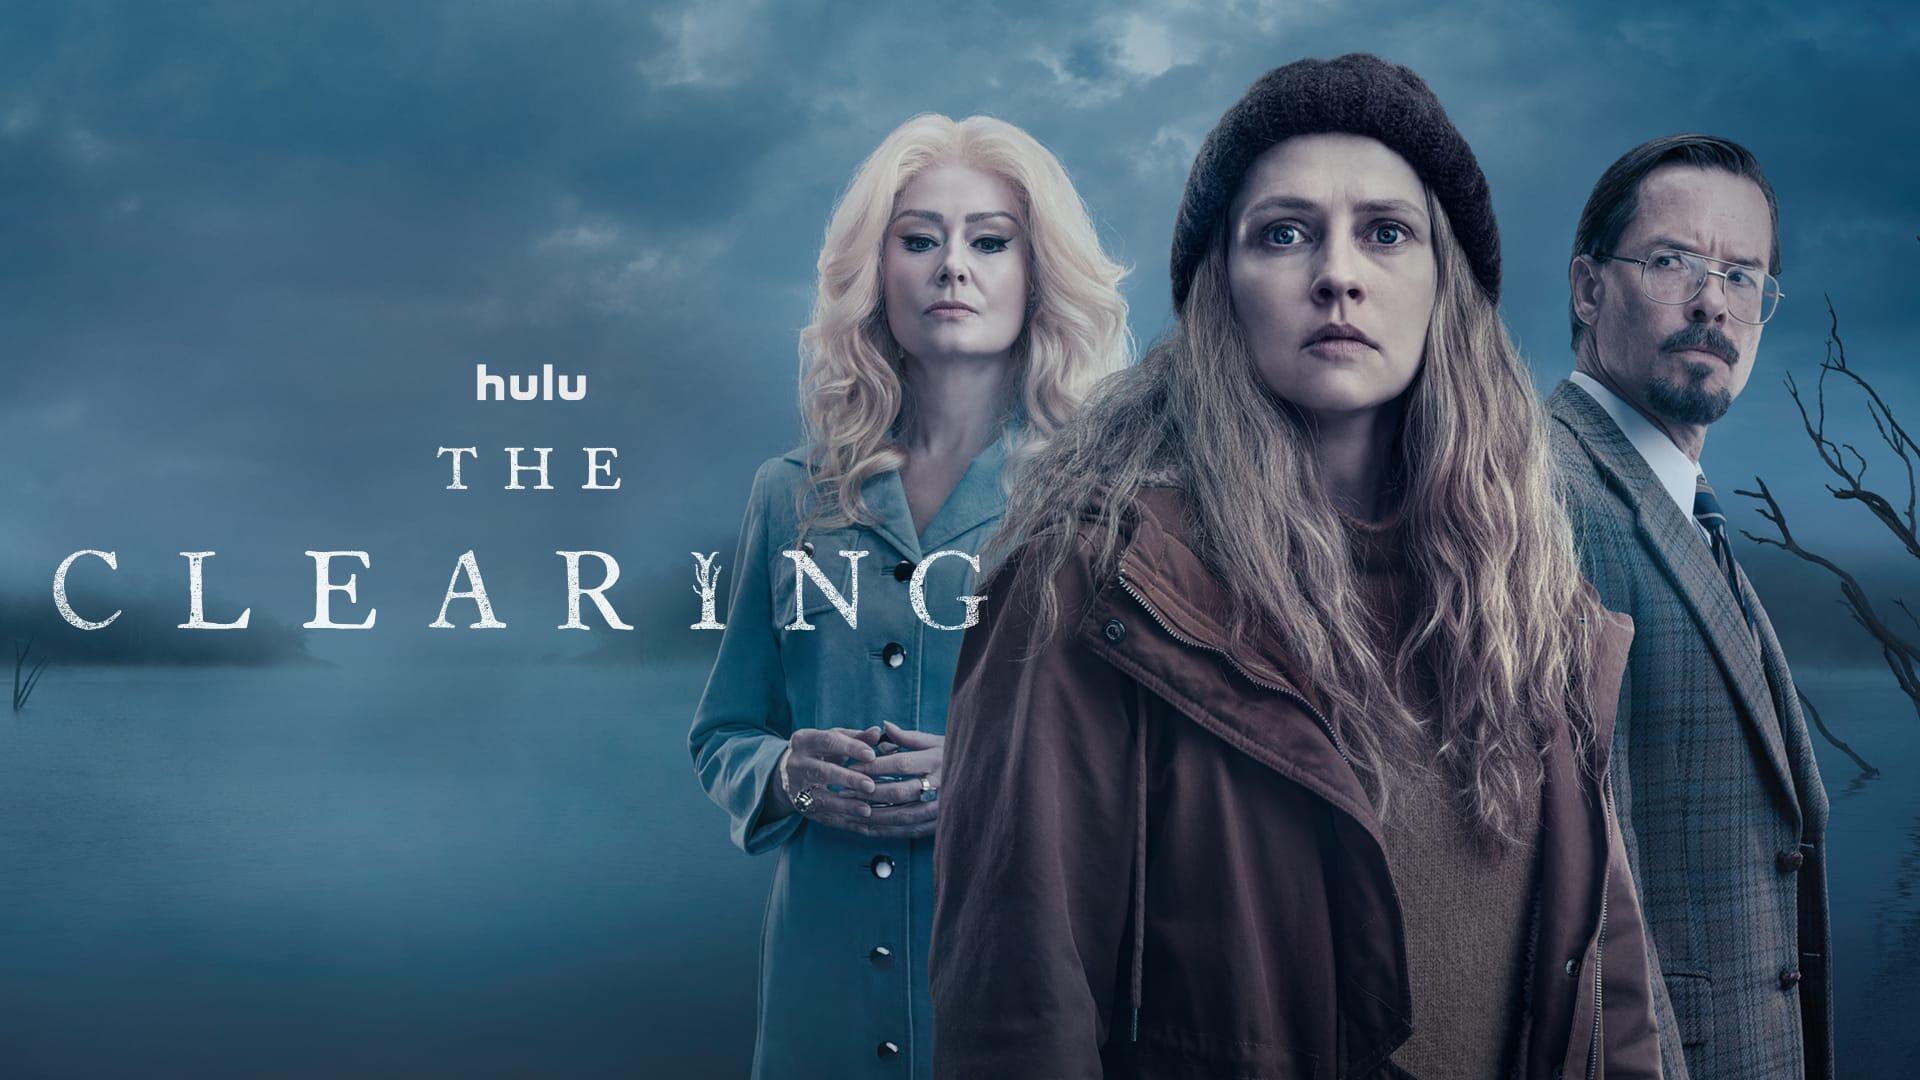 The Clearing -- Season 1 -- When a local girl goes missing, it triggers a woman’s memories from her childhood as a member of The Kindred – one of the few female led cults in history. Based on the crime thriller by J.P. Pomare, this exclusive original series follows the nightmares of a cult survivor who’s forced to face the demons from her past in order to stop the kidnapping and coercion of innocent children in the future. “The Clearing” is an emotional and psychological thriller that burrows under the skin and inside the mind, blurring the lines between past and present, reality and nightmare. Adrienne (Miranda Otto), Freya (Teresa Palmer) and Dr. Lathan (Guy Pearce), shown. (Courtesy of Hulu)